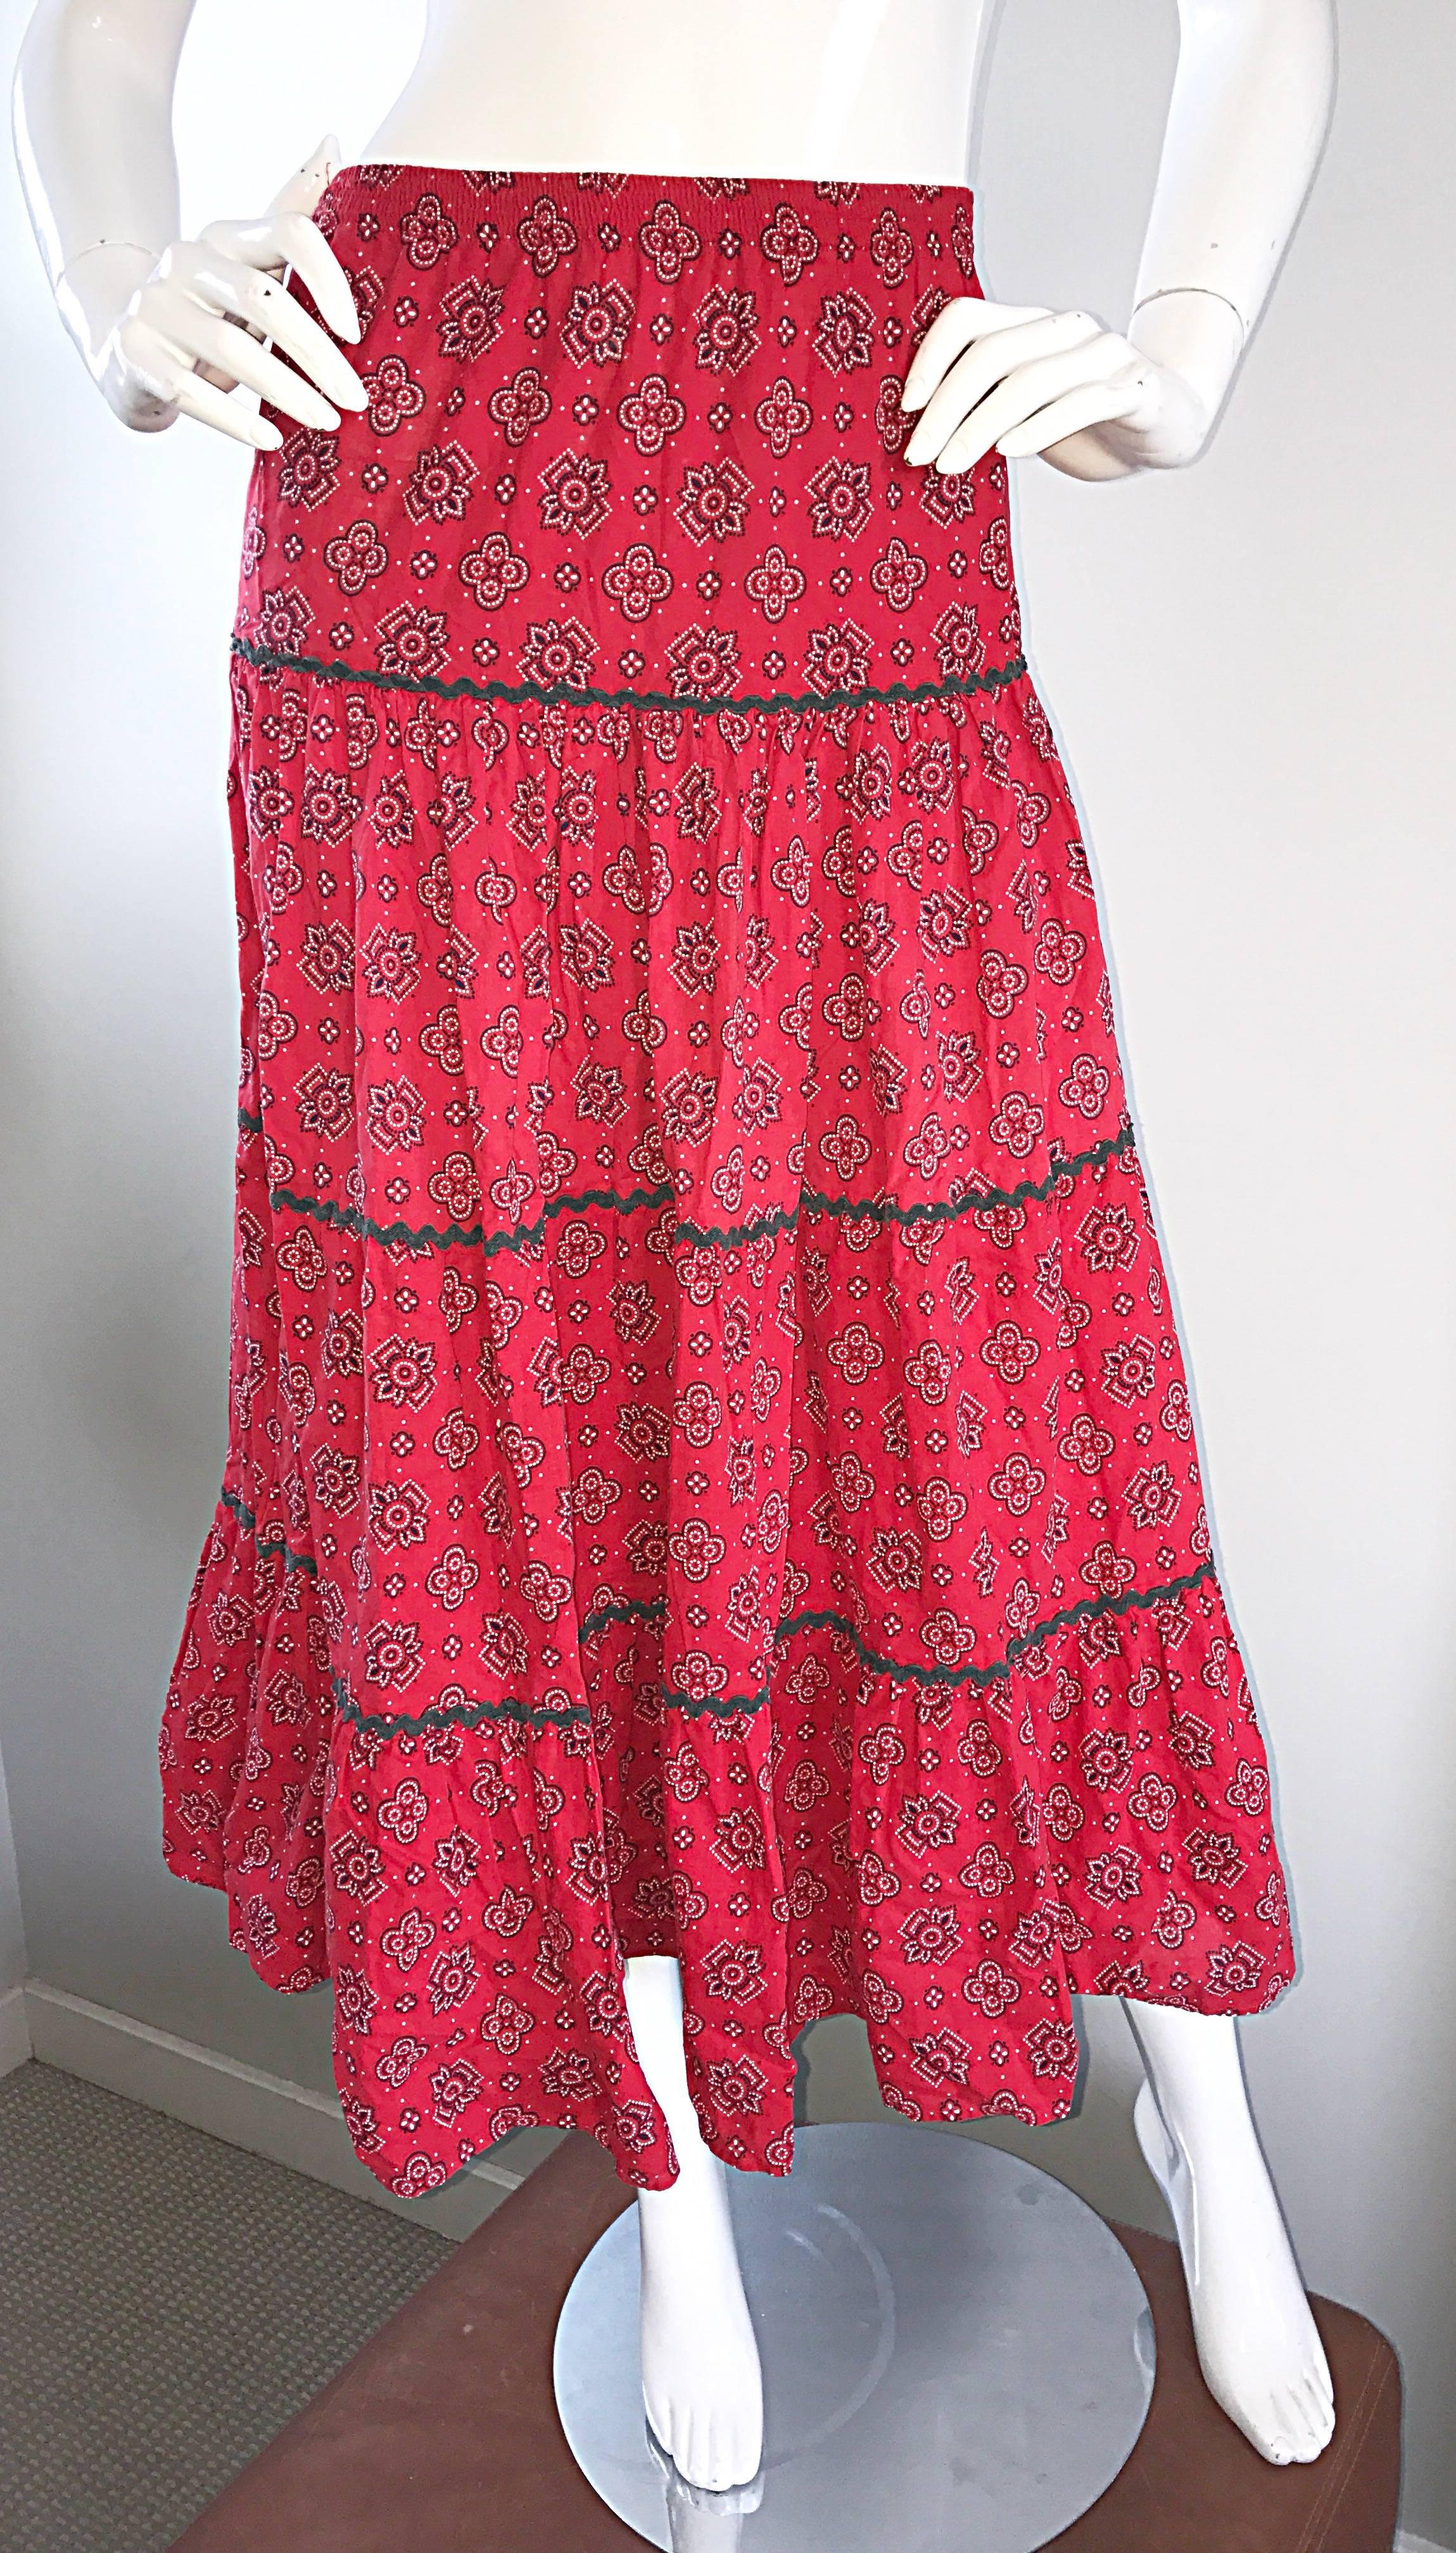 1970s Joseph Magnin Bandana Print in Red Paisley Tiered Midi Boho Skirt or Dress In Excellent Condition For Sale In San Diego, CA